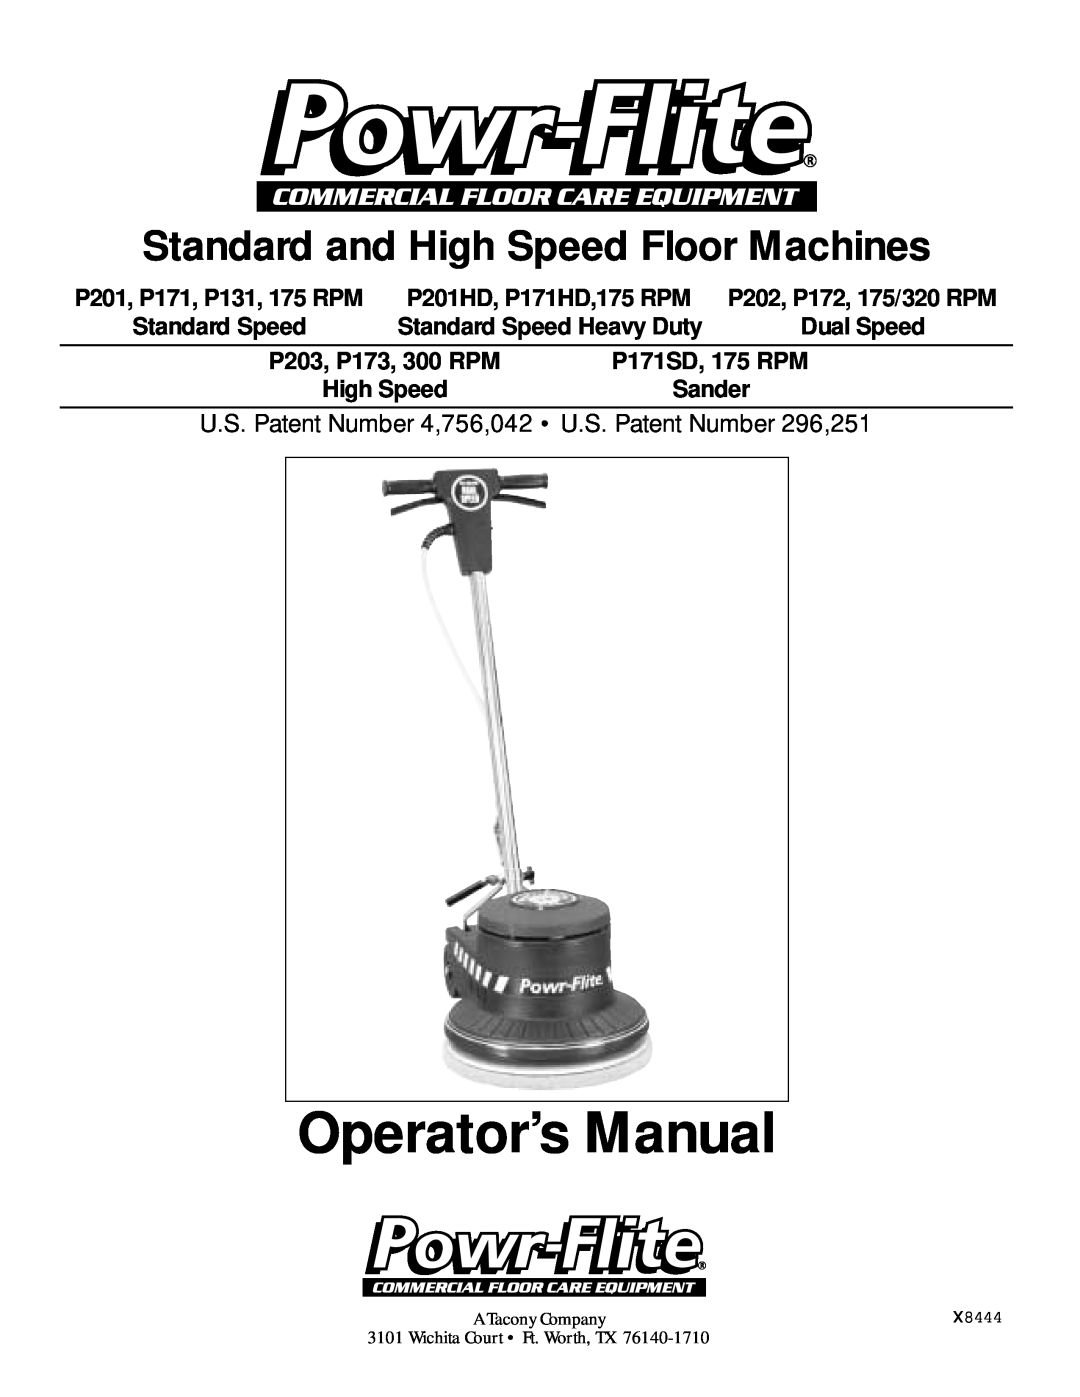 Addtron Technology P201 manual Operator’s Manual, Standard and High Speed Floor Machines, Standard Speed, Dual Speed 